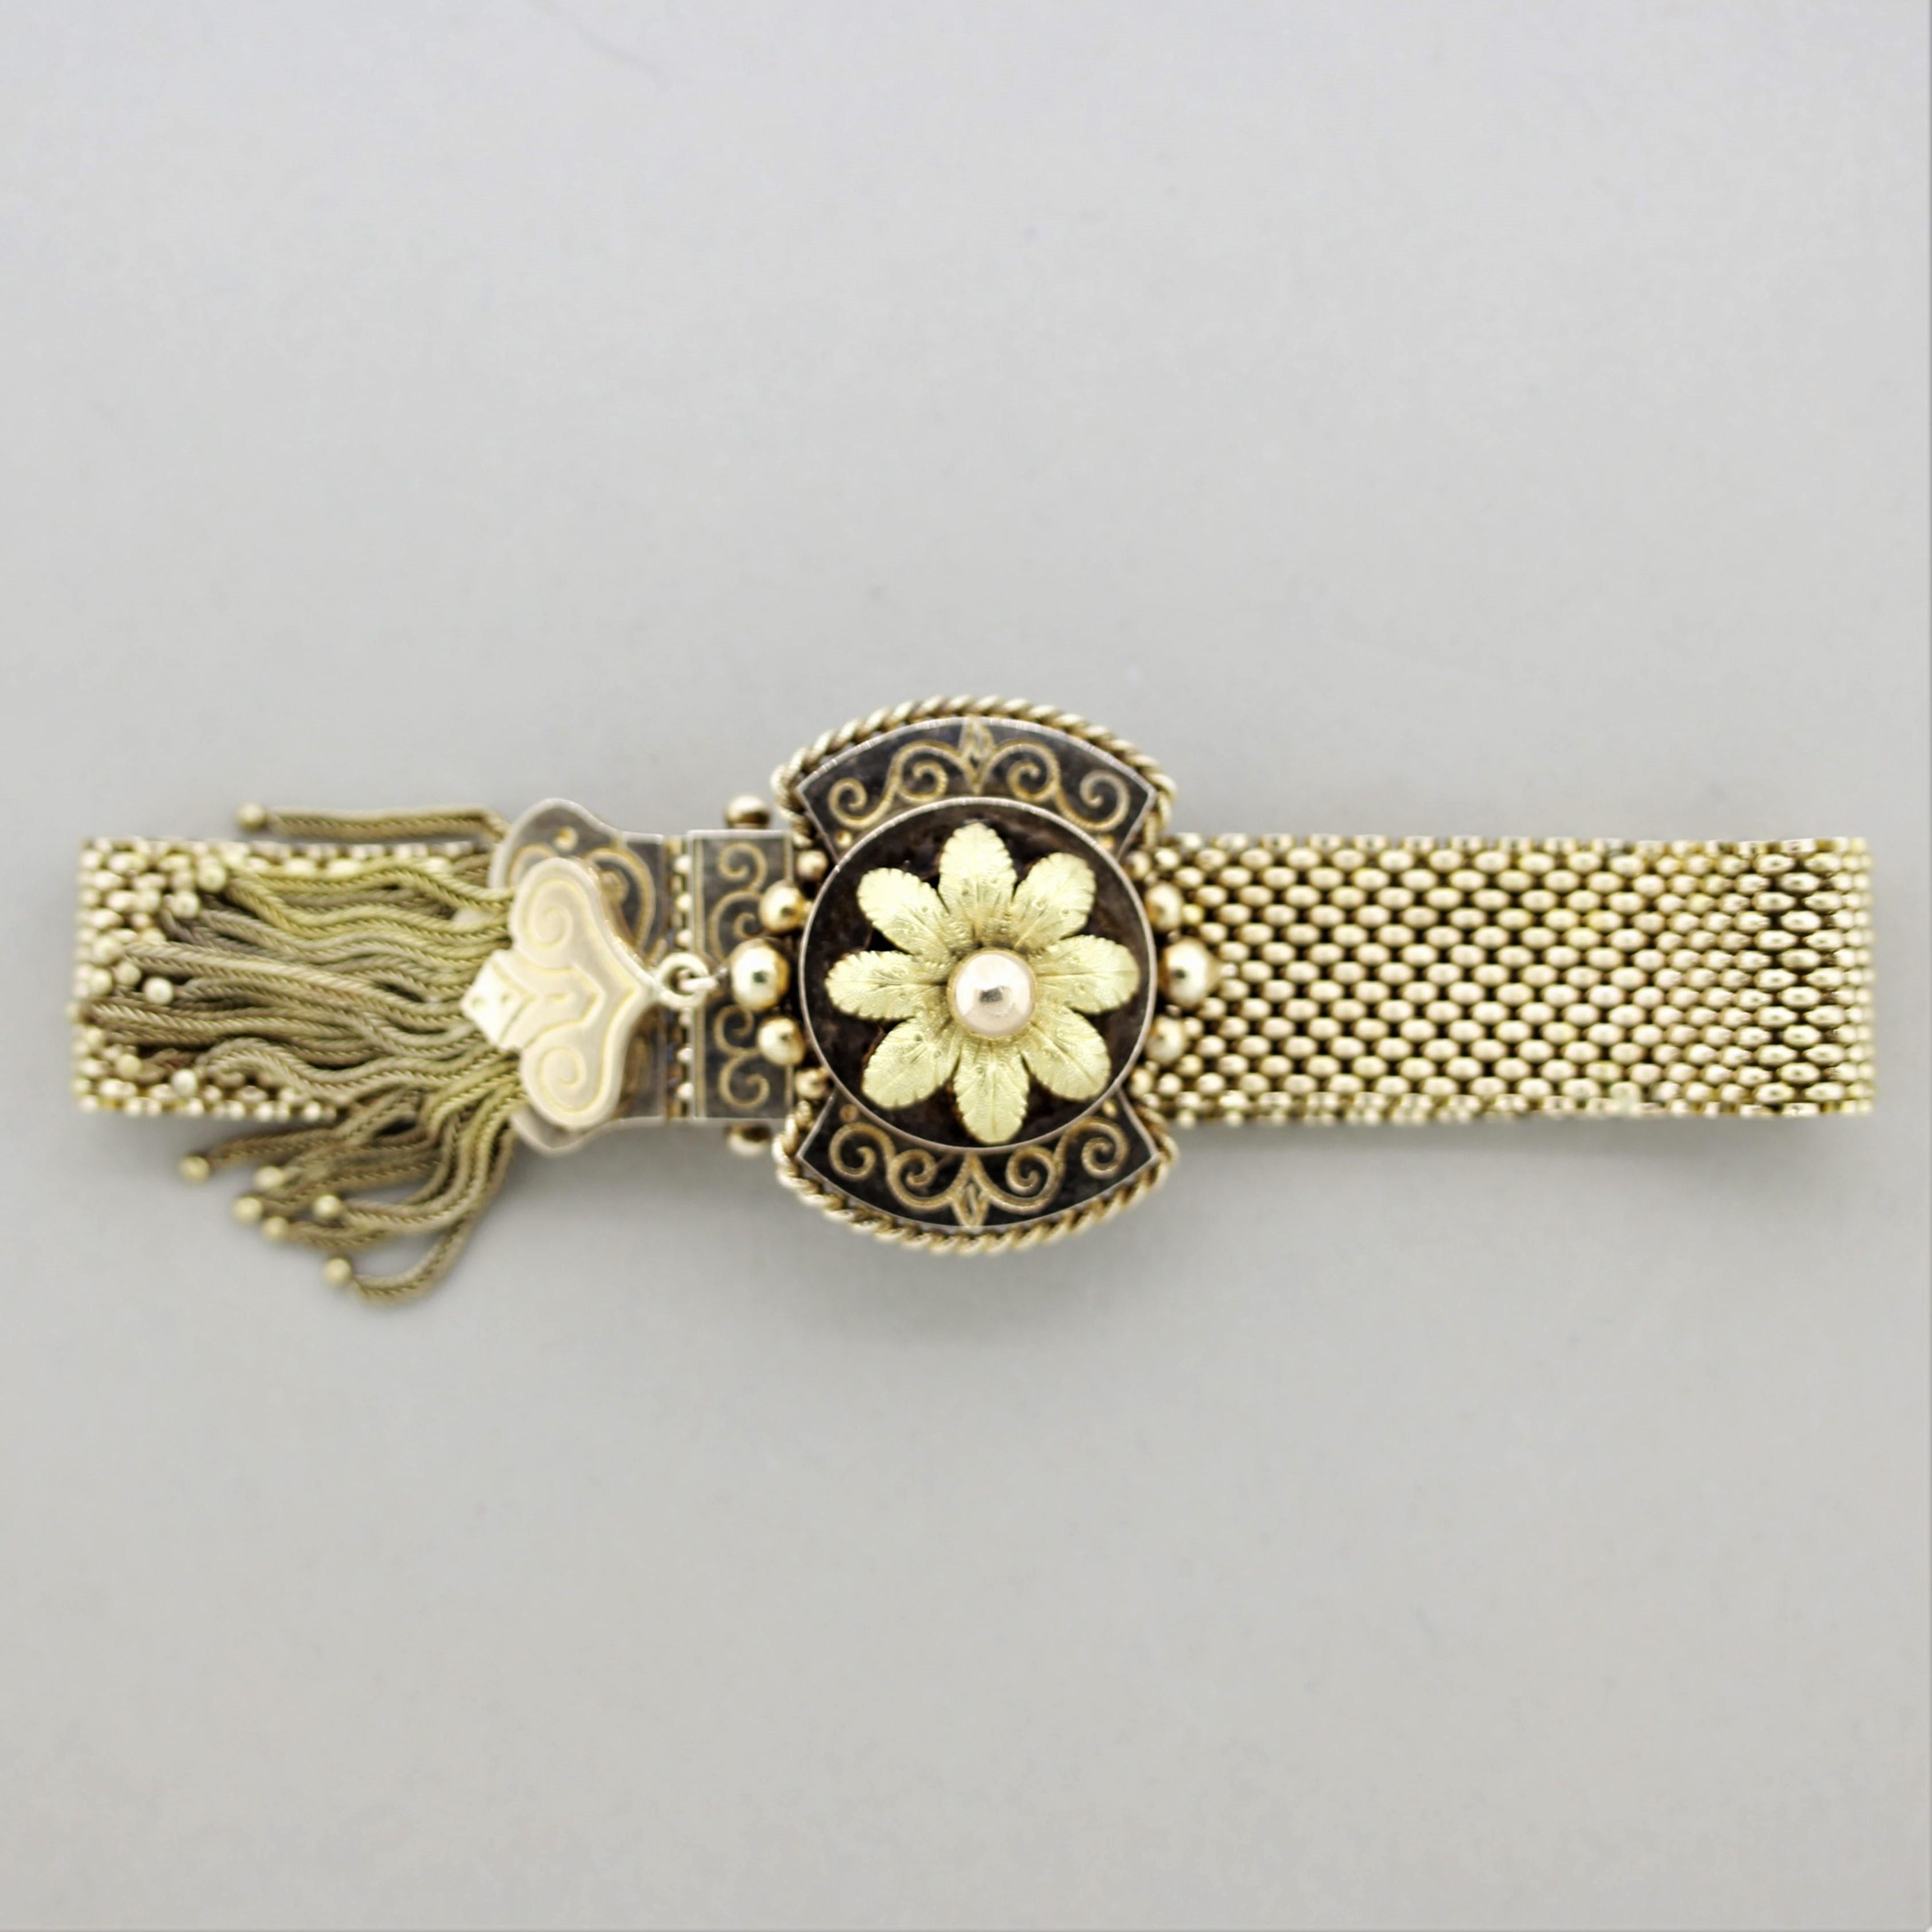 A classic slide bracelet from the Victorian era, circa 1890’s. It has a hand carved and textured floral motif in its center as well as braided gold tassels on its ends. The bracelet slides open and closed to lengthen or shorten with ease. Fits